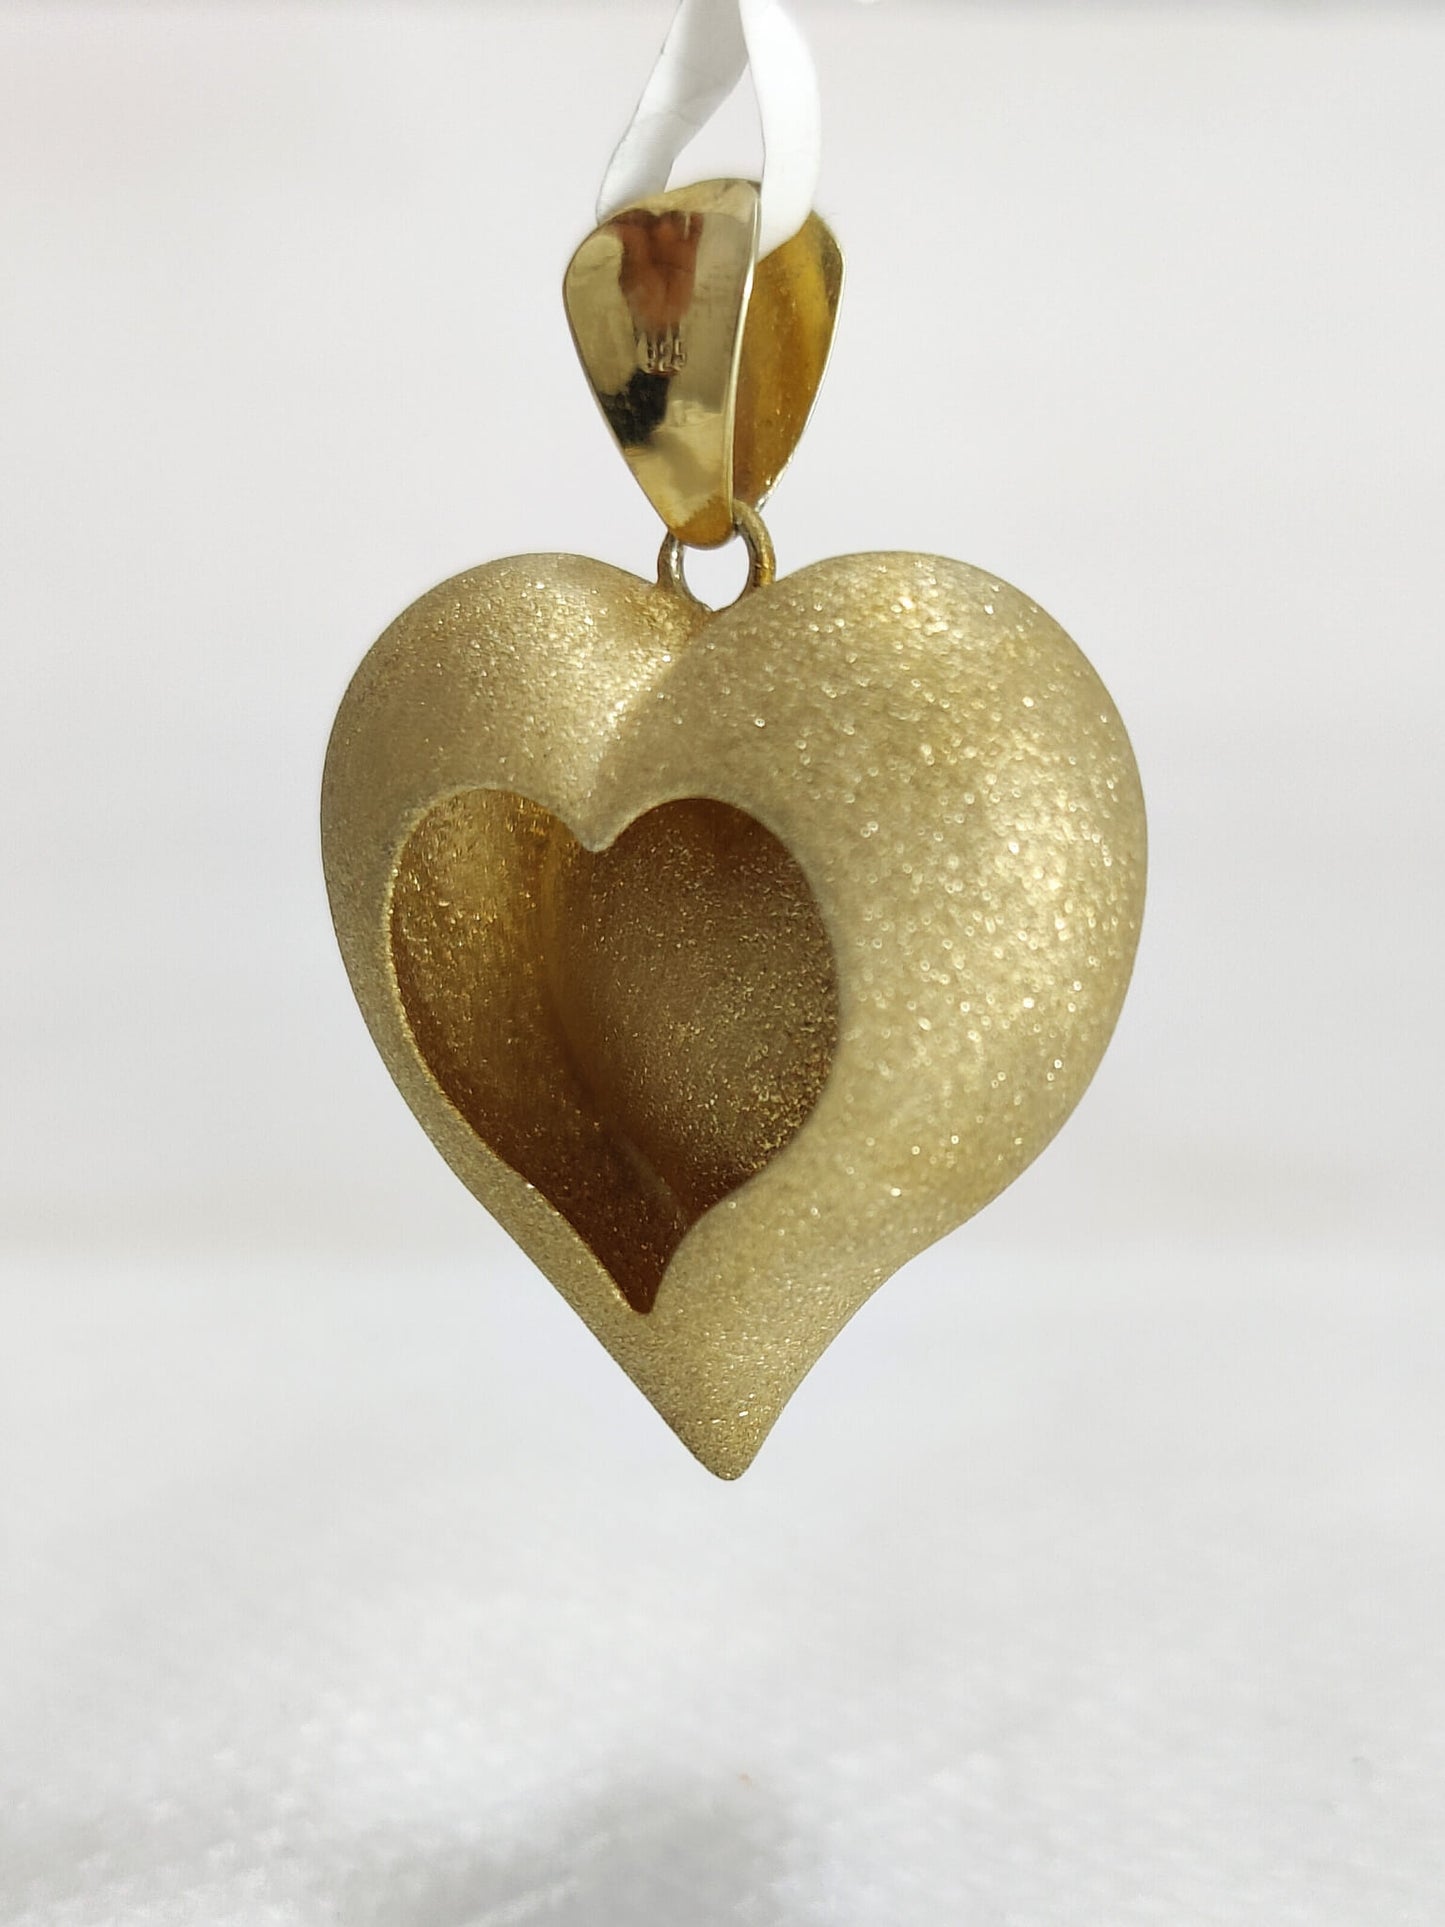 Cute Heart Shaped Pendant for Your Love